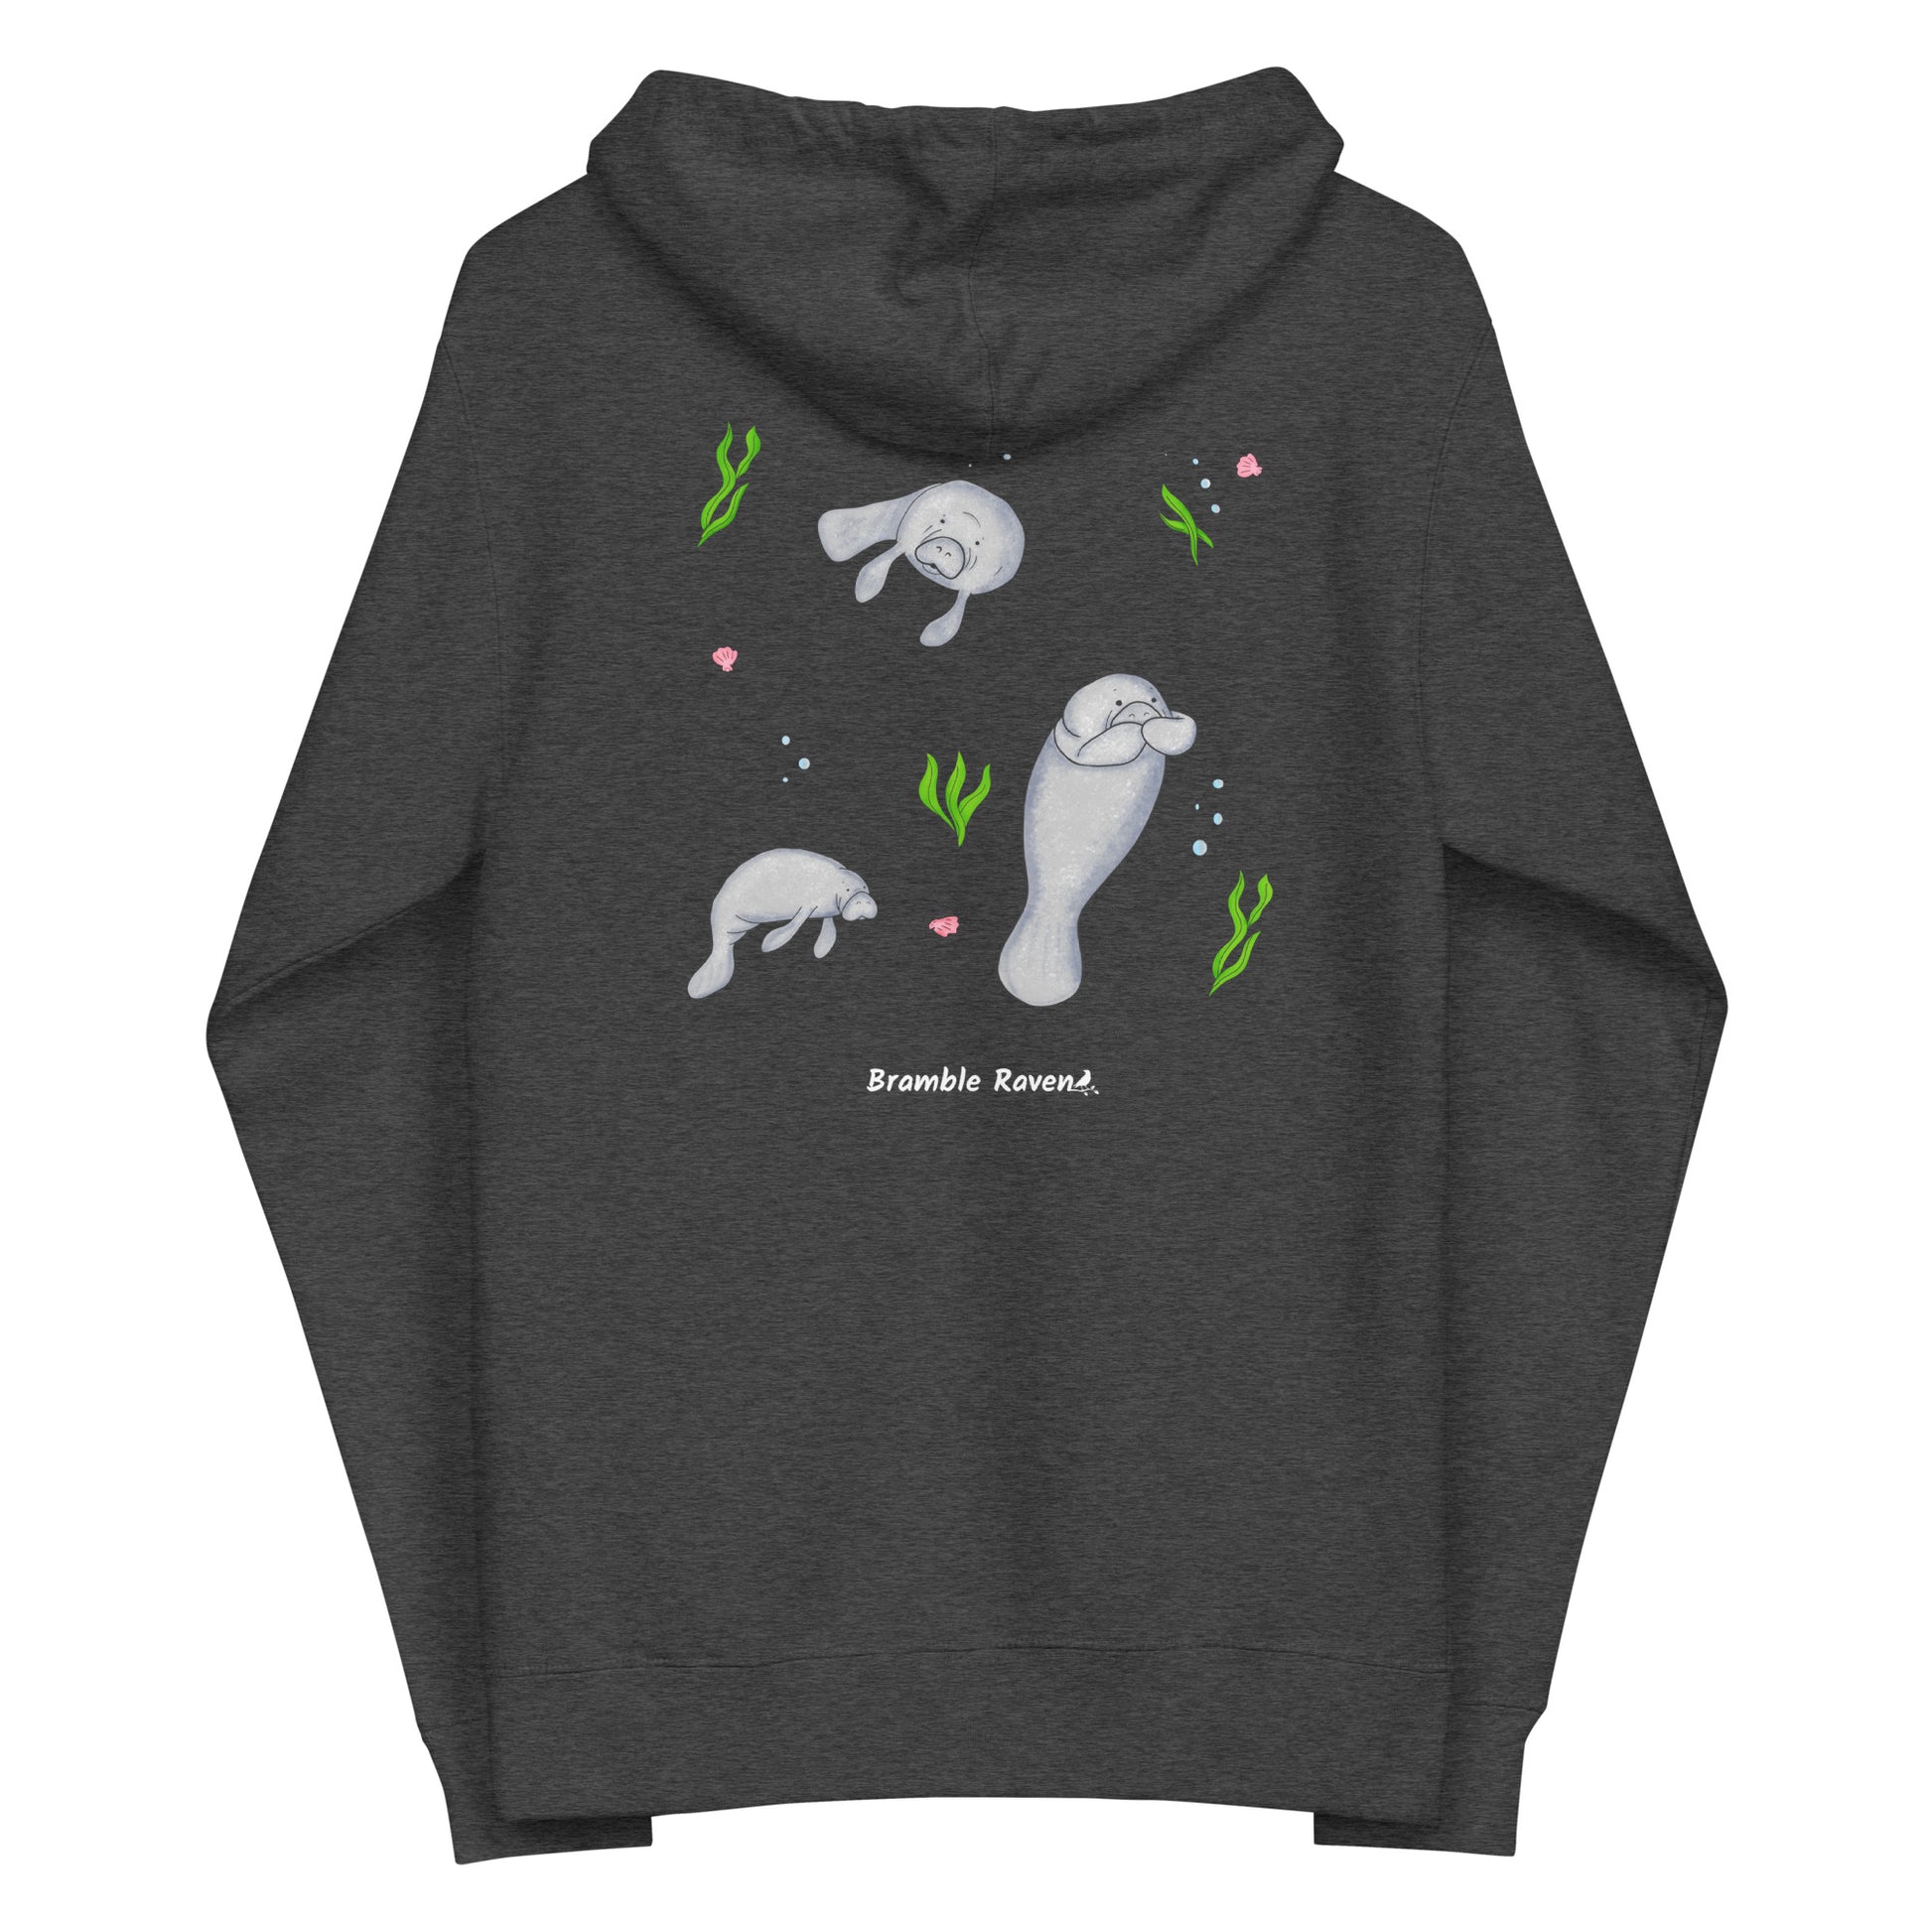 Charcoal heather grey colored unisex zip-up hoodie. Features three manatees with seaweed, seashells, and bubbles on the back. It is made of soft, premium quality fleece fabric and has a jersey-lined hood. Made with 100% cotton face and 80% cotton, 20% polyester blend fleece (Charcoal Heather is 55% cotton, 45% polyester). Features metal eyelets and zipper.